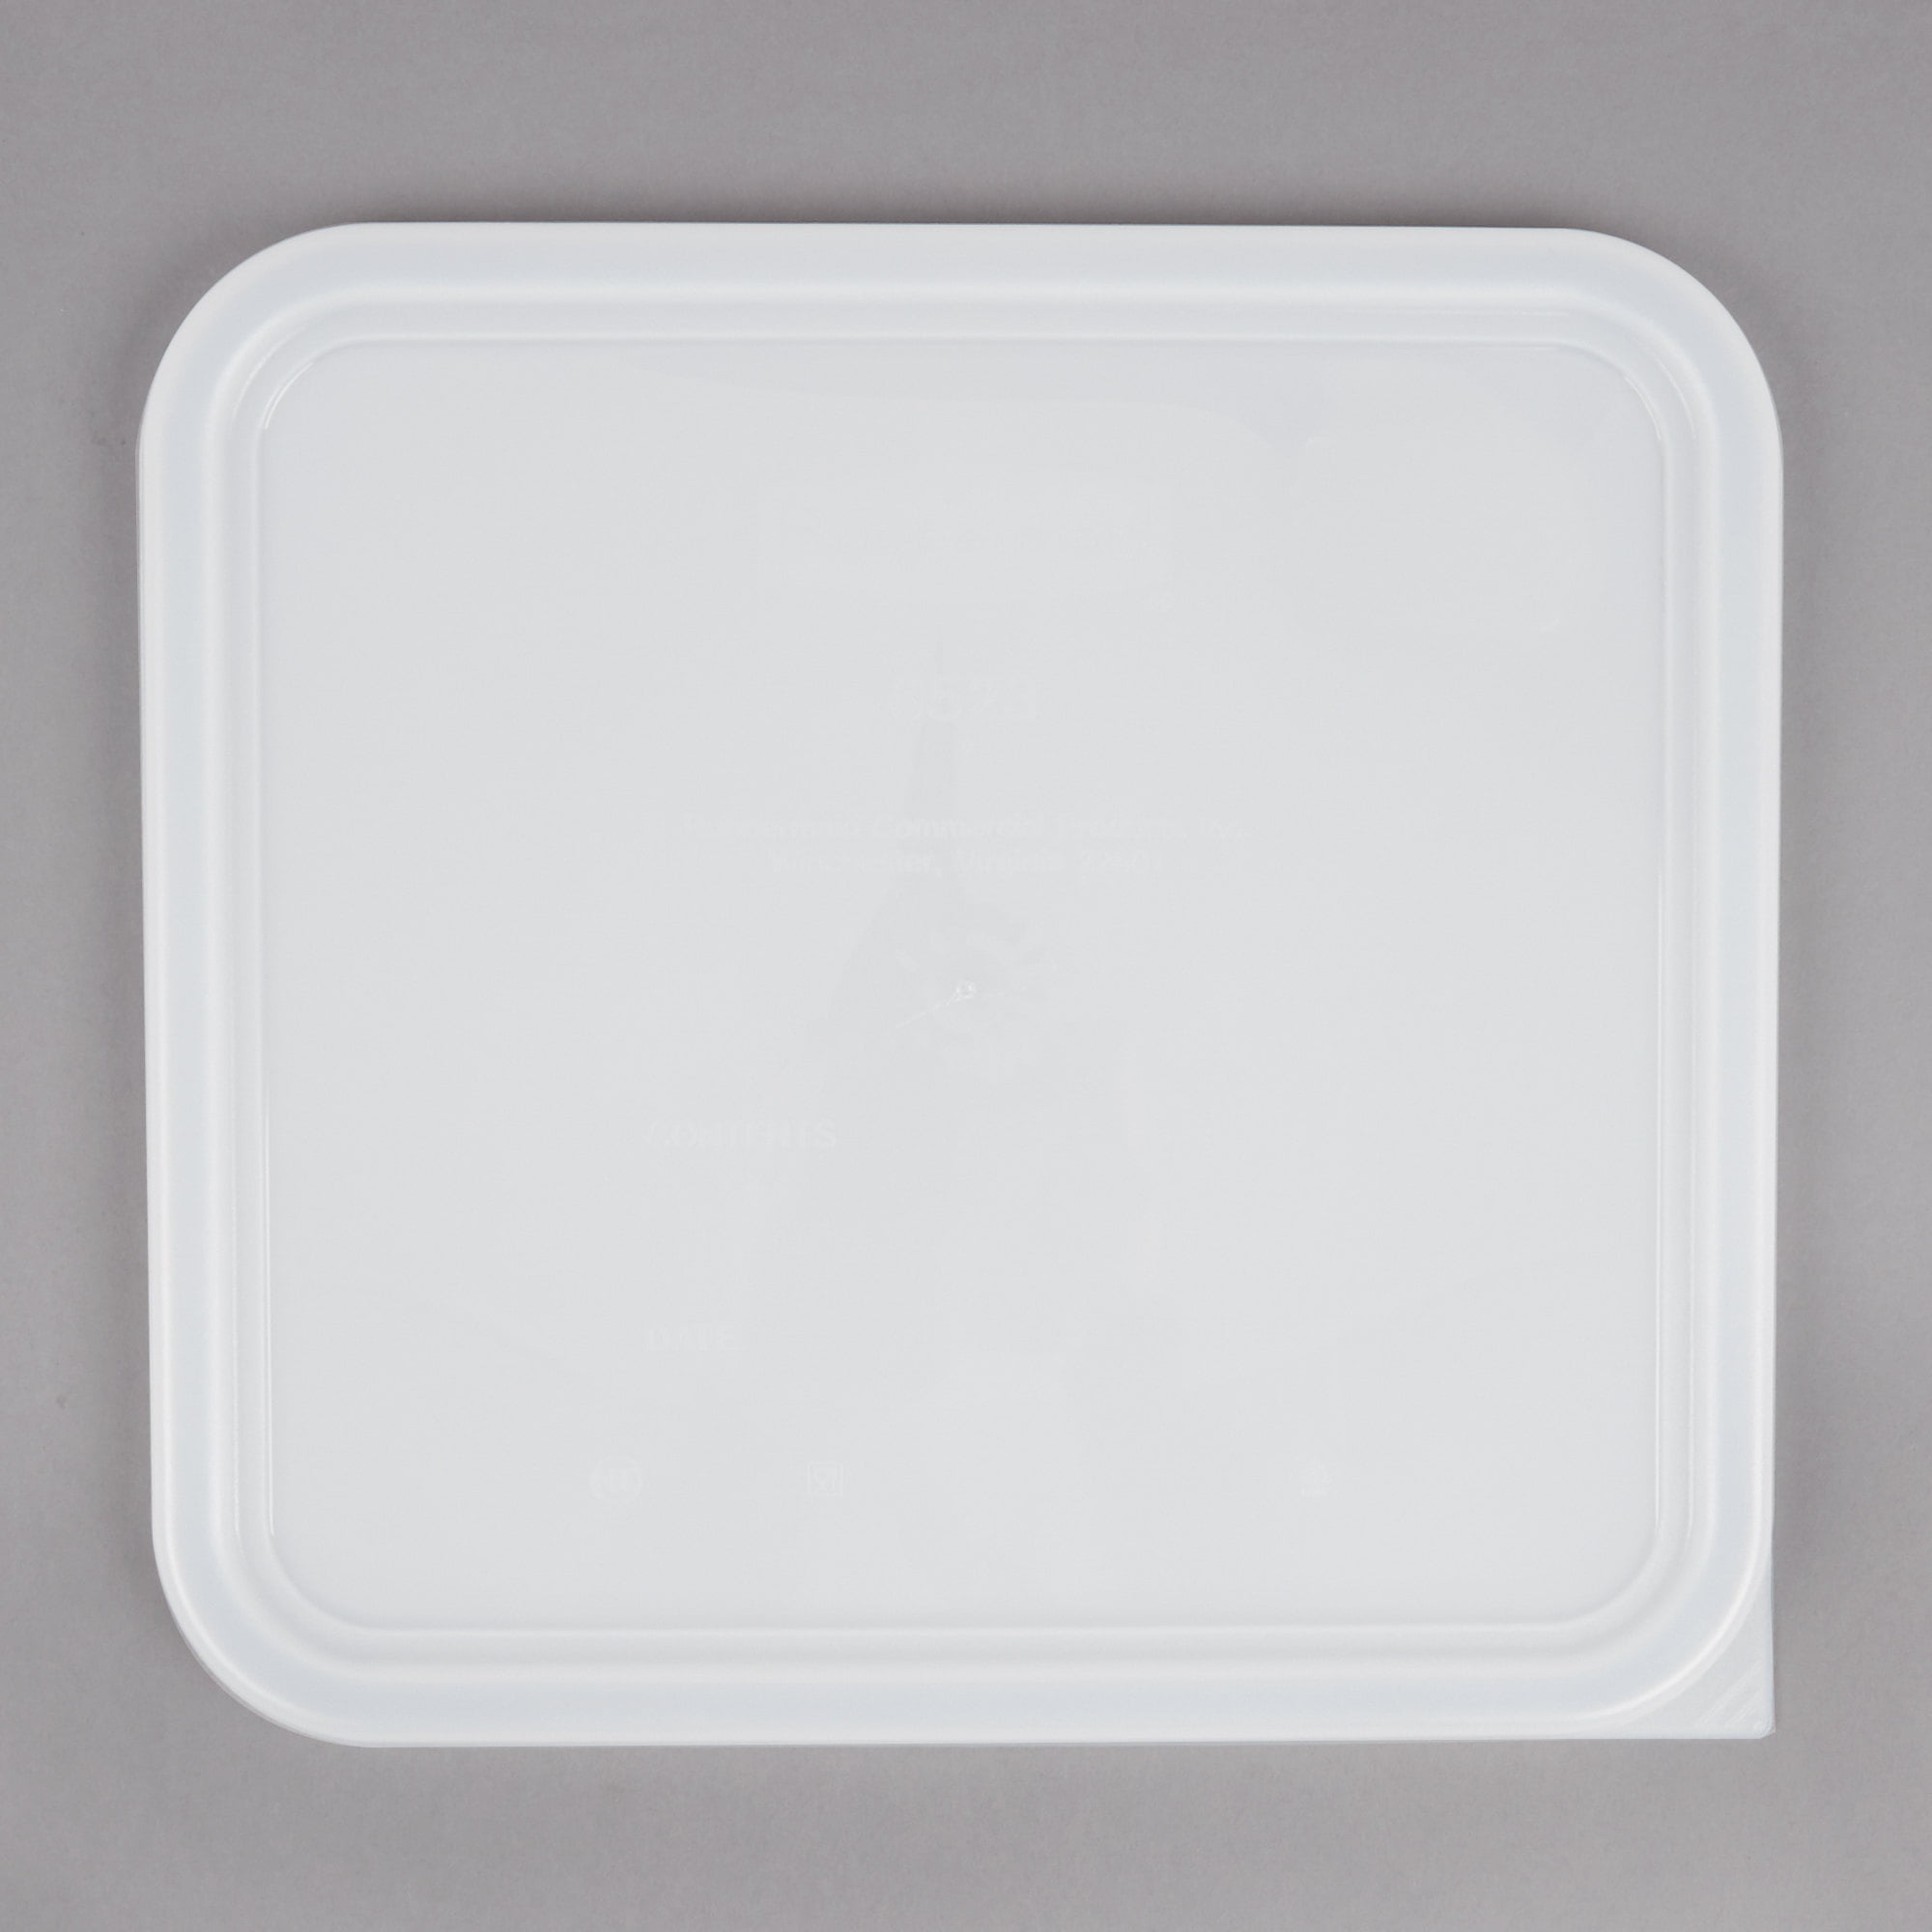 Rubbermaid FG652300WHT White Lid For 12 18 and 22 Quart Food Storage Boxes 